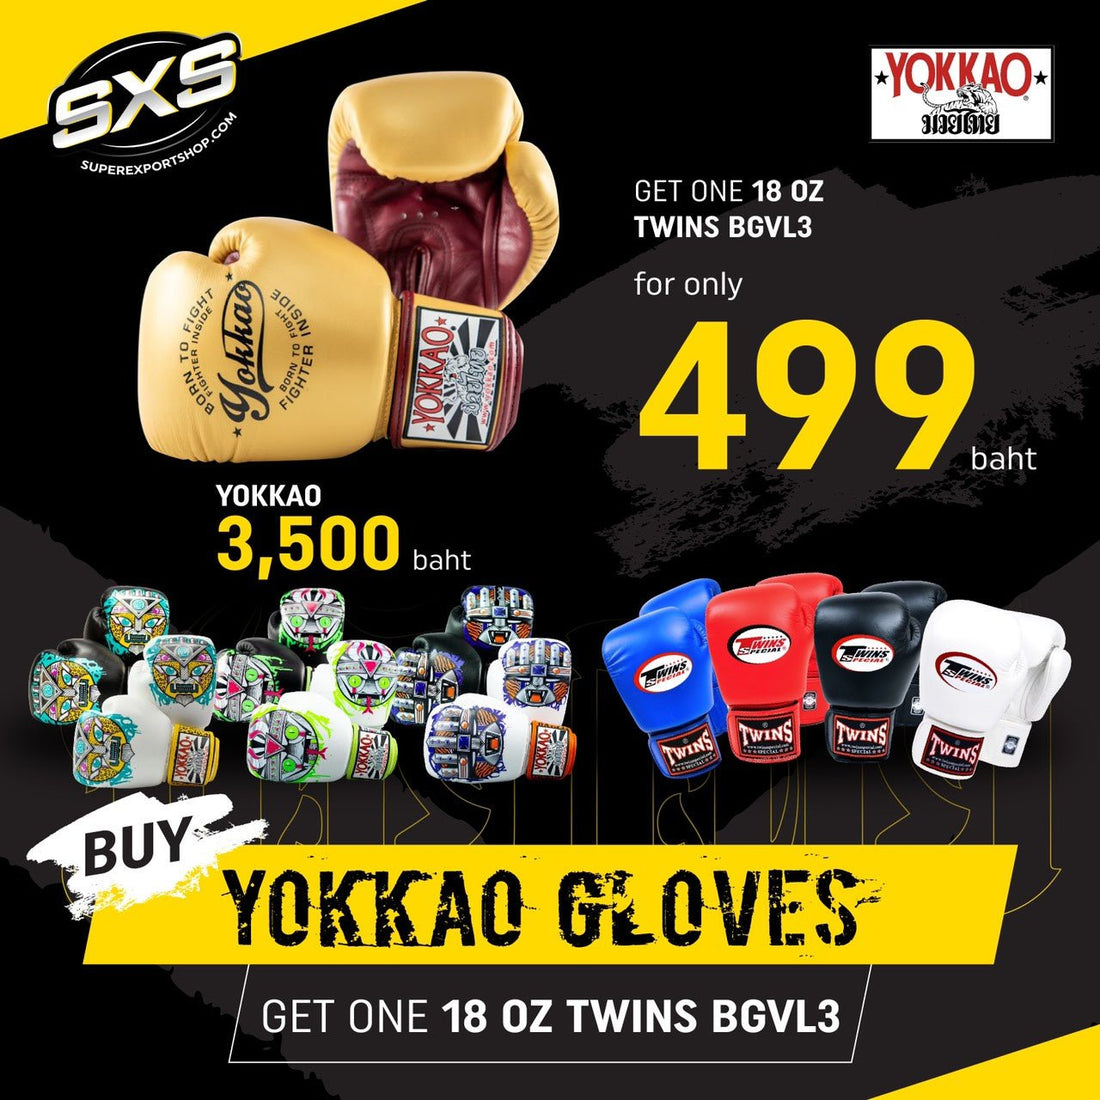 Buy Yokkao Gloves get Twins Gloves 18 oz for 499 THB (price for Twins Gloves) | SUPER EXPORT SHOP